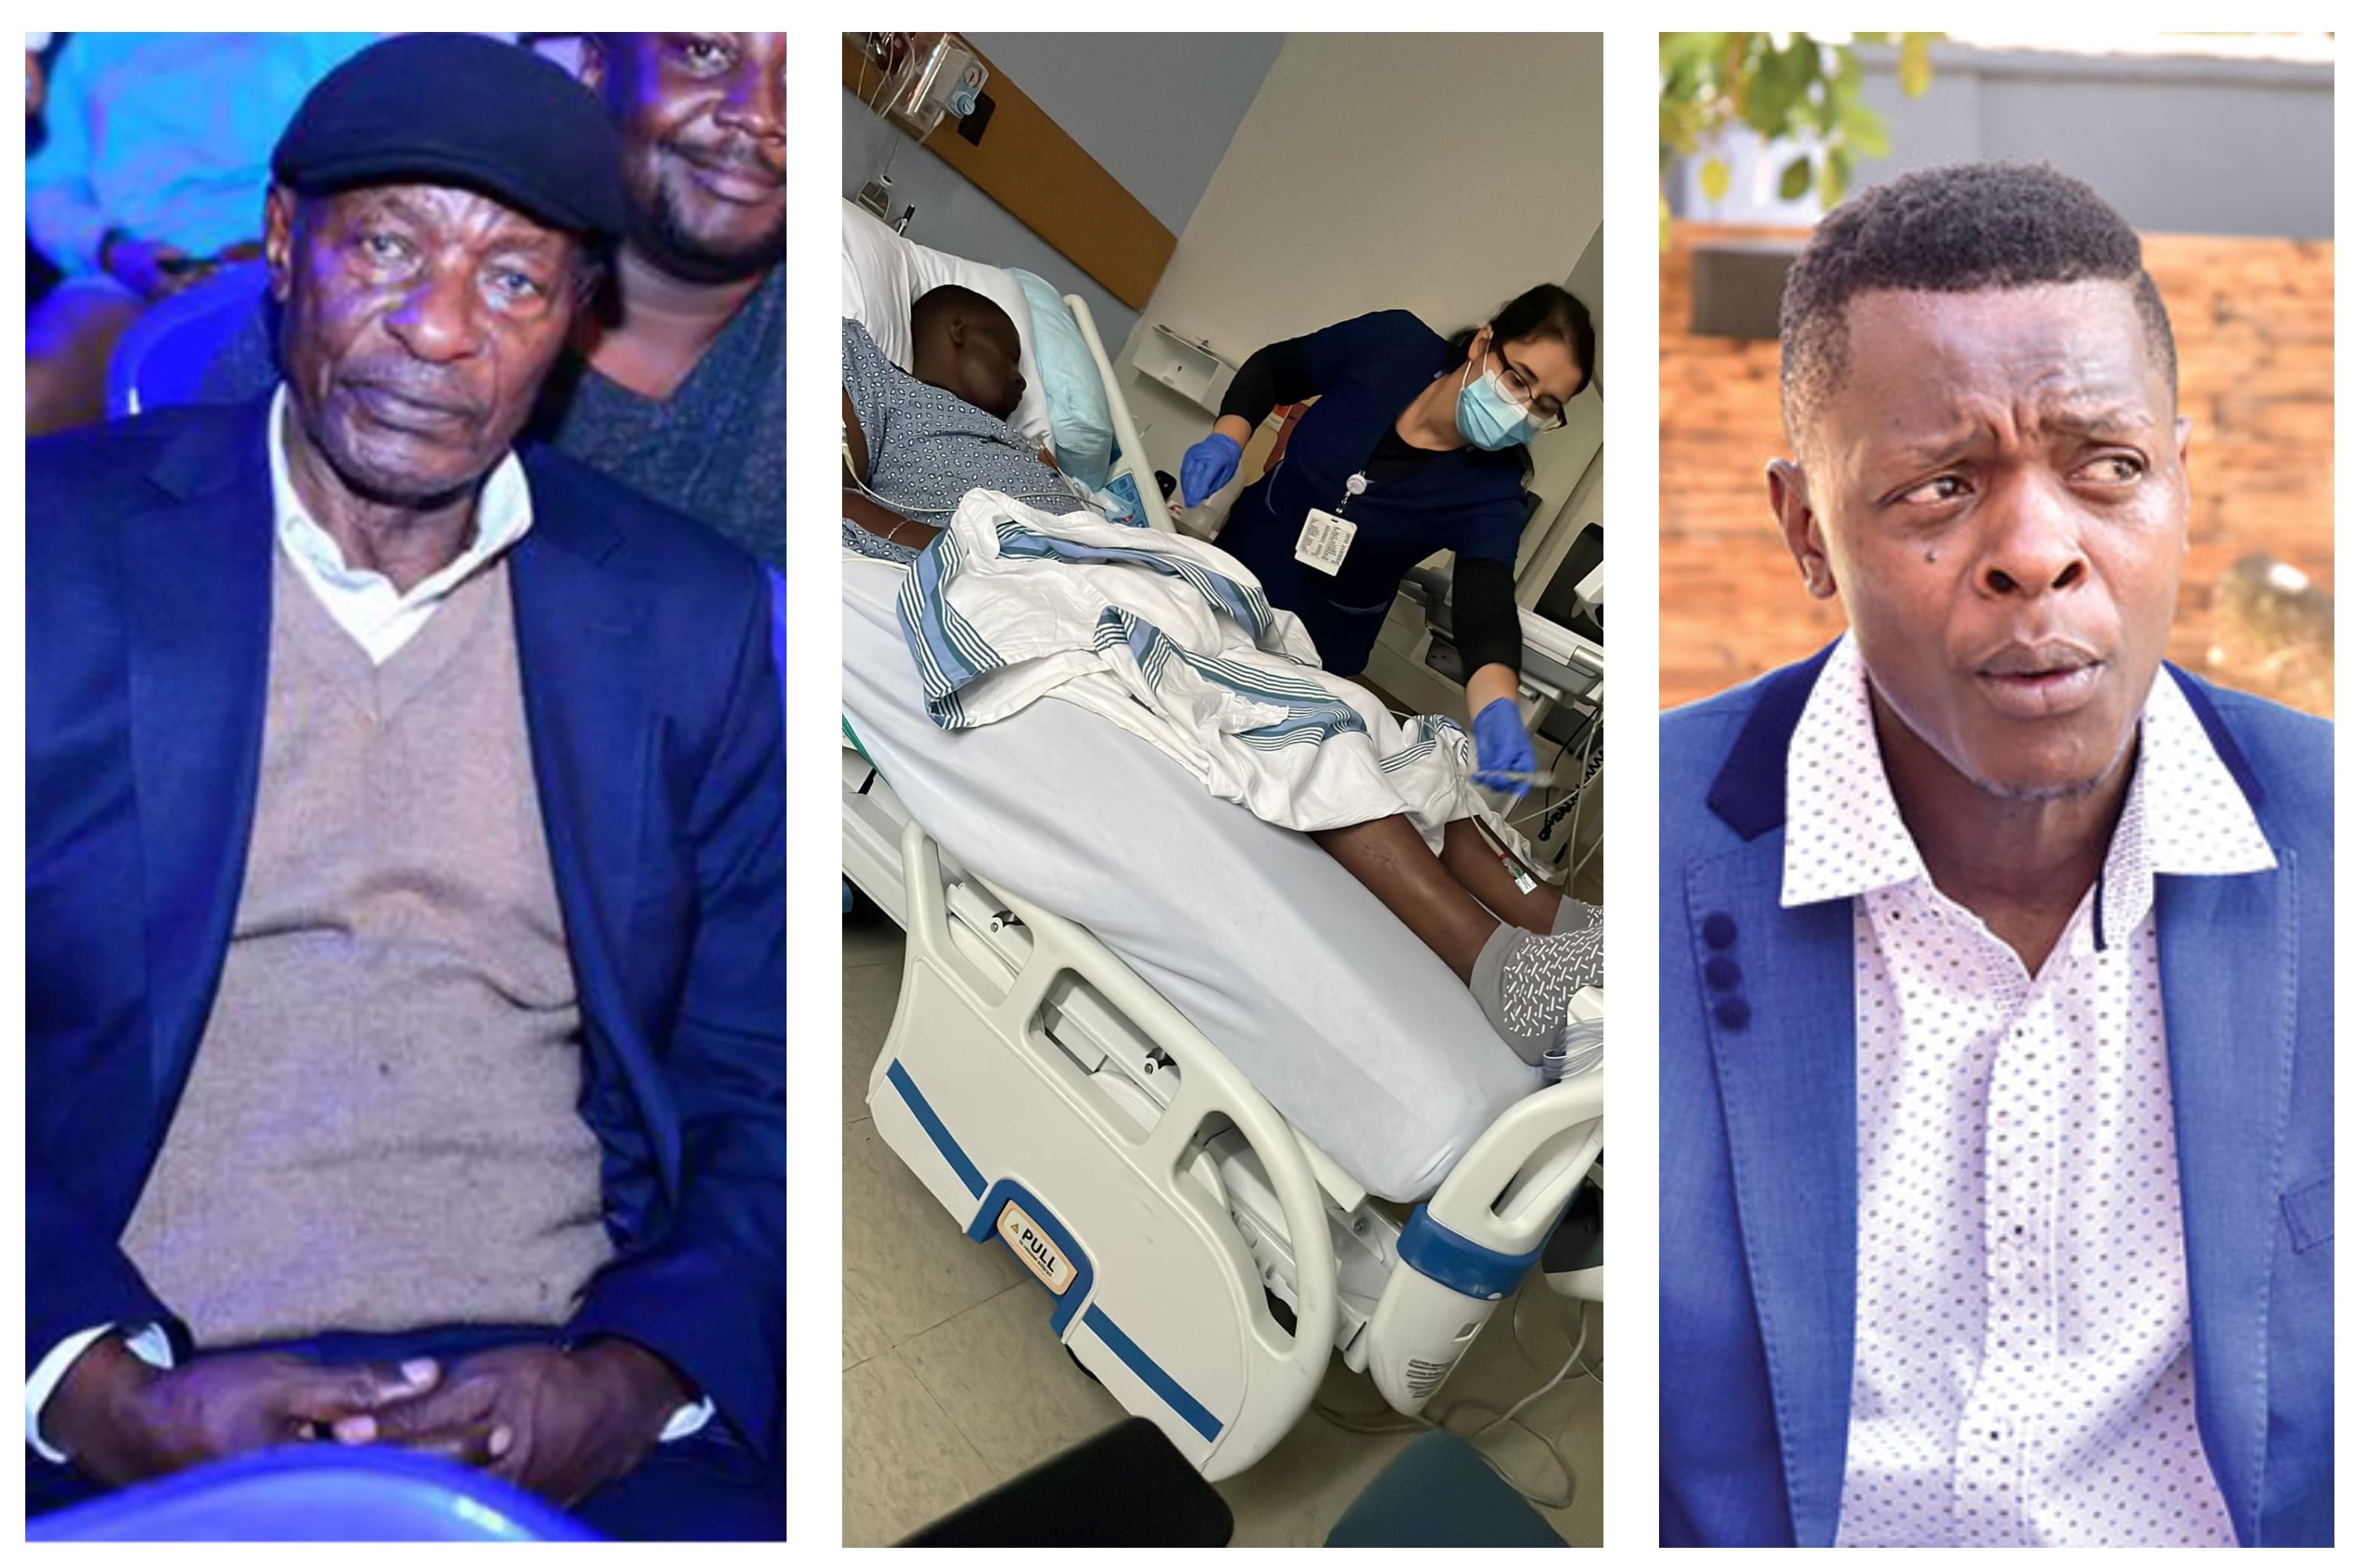 You don't wish us well' - Chameleone's dad blames sons' illnesses on  'haters' | Pulse Uganda